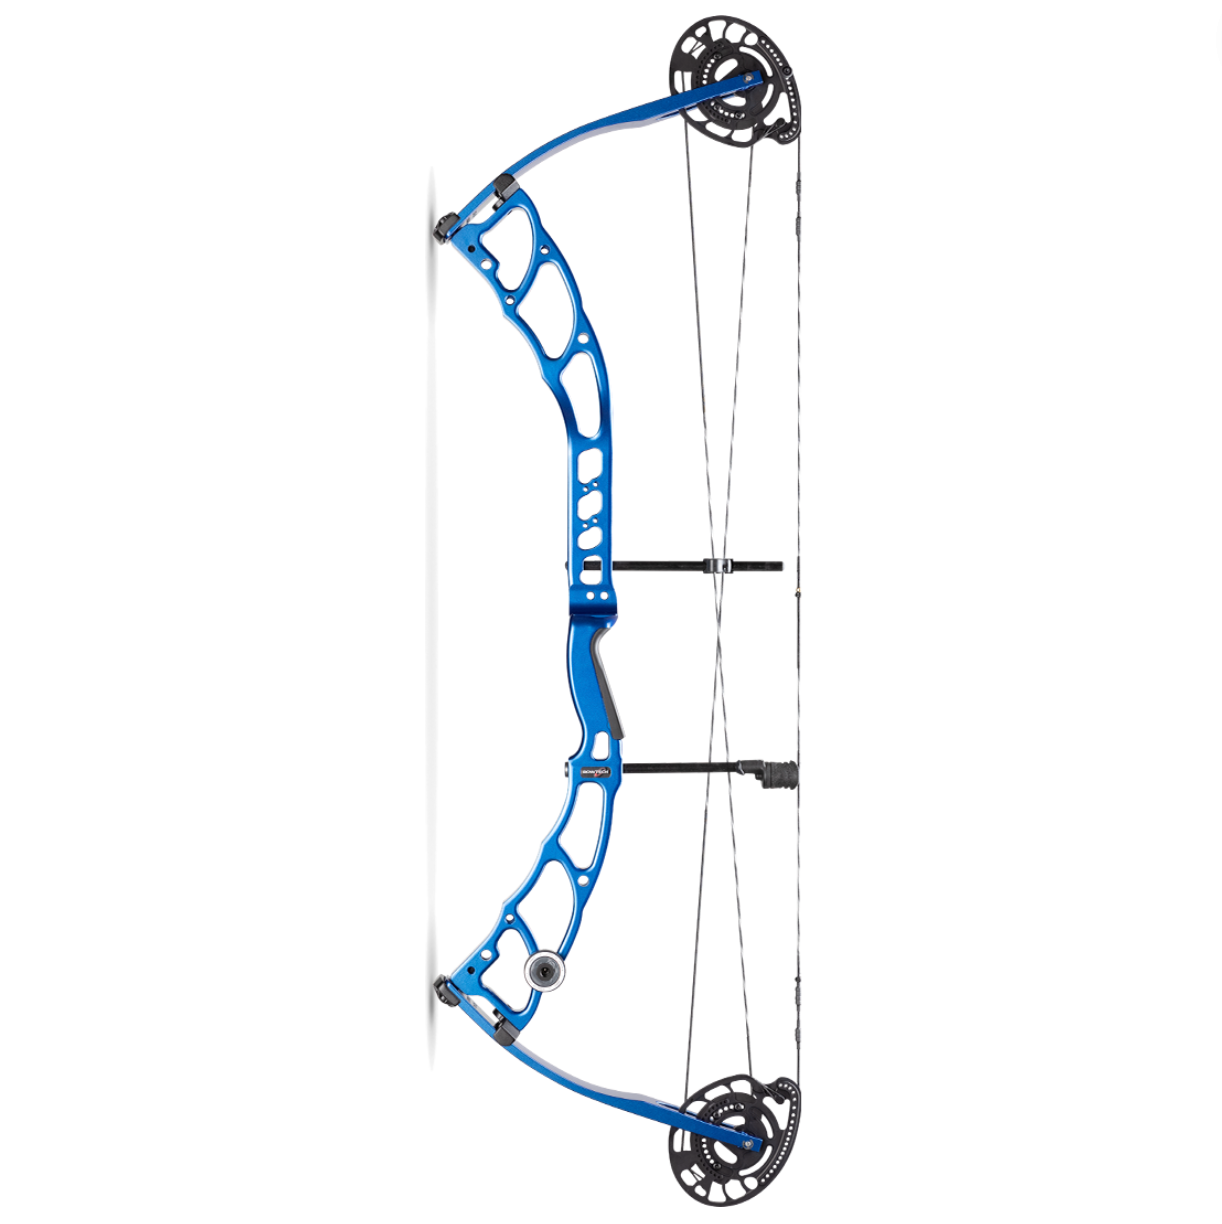 Bowtech Specialist II Compound Bow